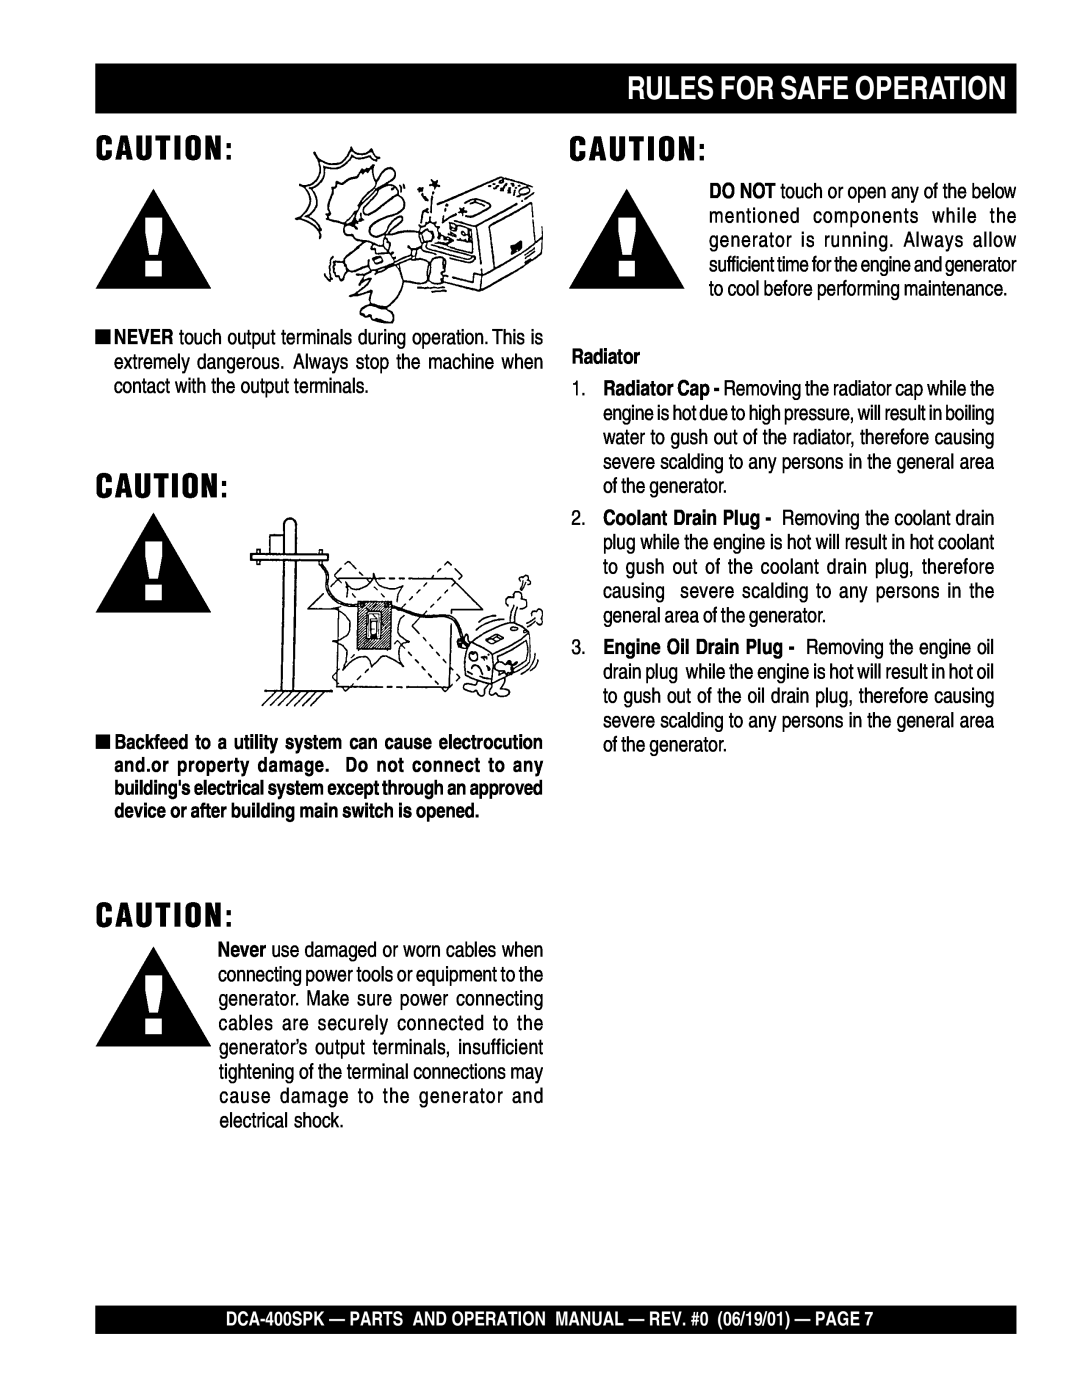 Multiquip DCA-400SPK operation manual Rules For Safe Operation, Caution Caution, Radiator 